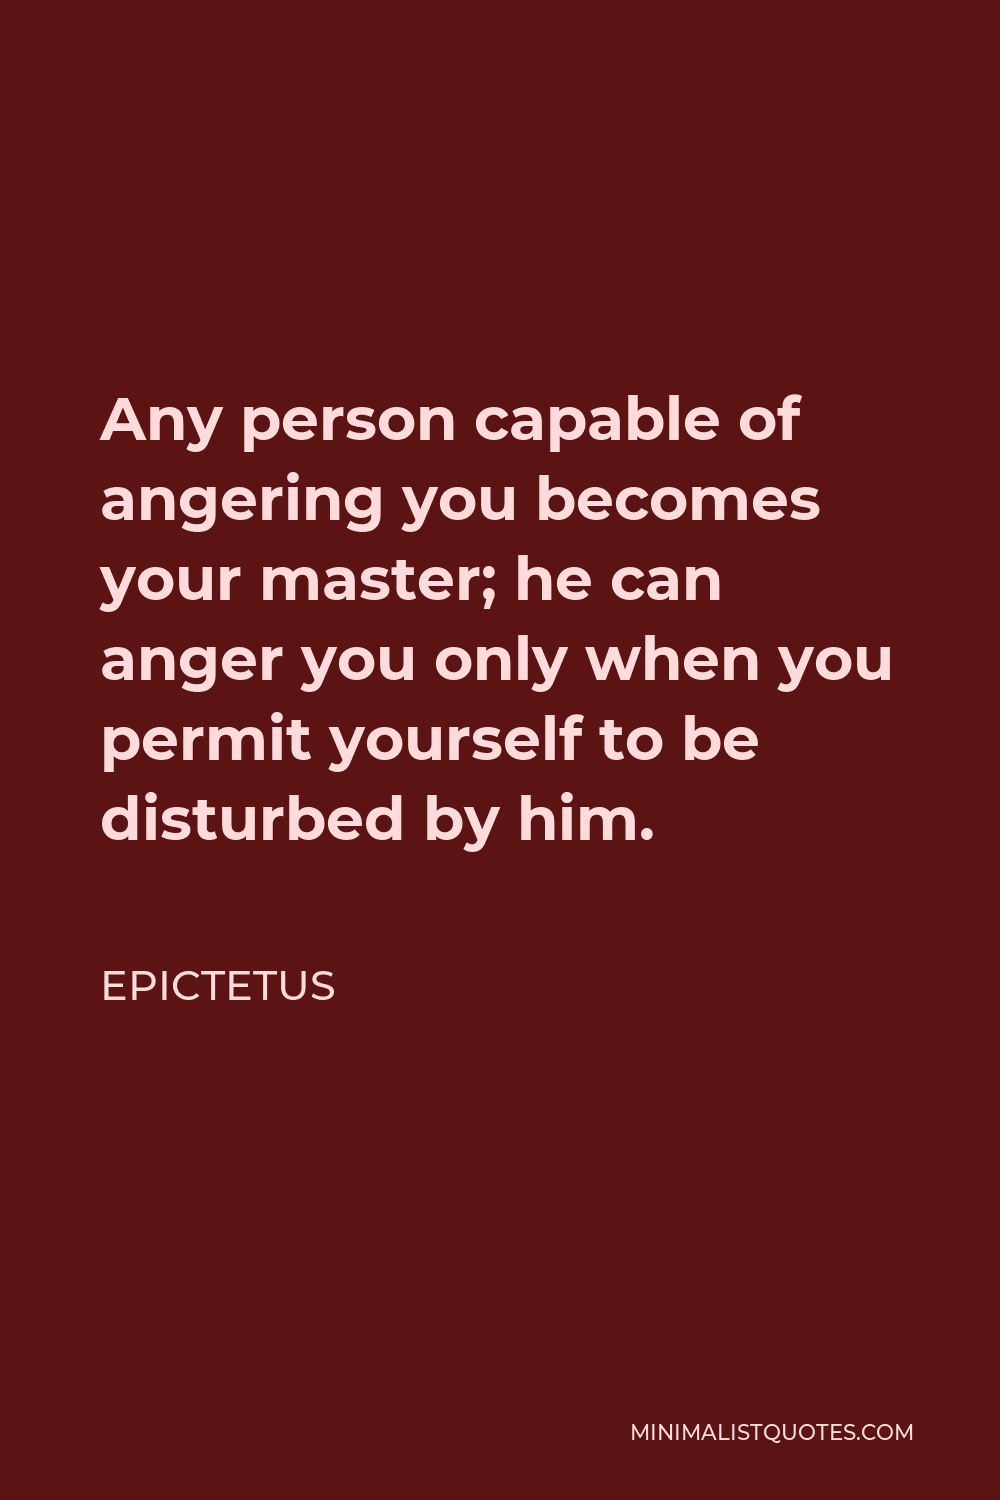 Epictetus Quote - Any person capable of angering you becomes your master; he can anger you only when you permit yourself to be disturbed by him.